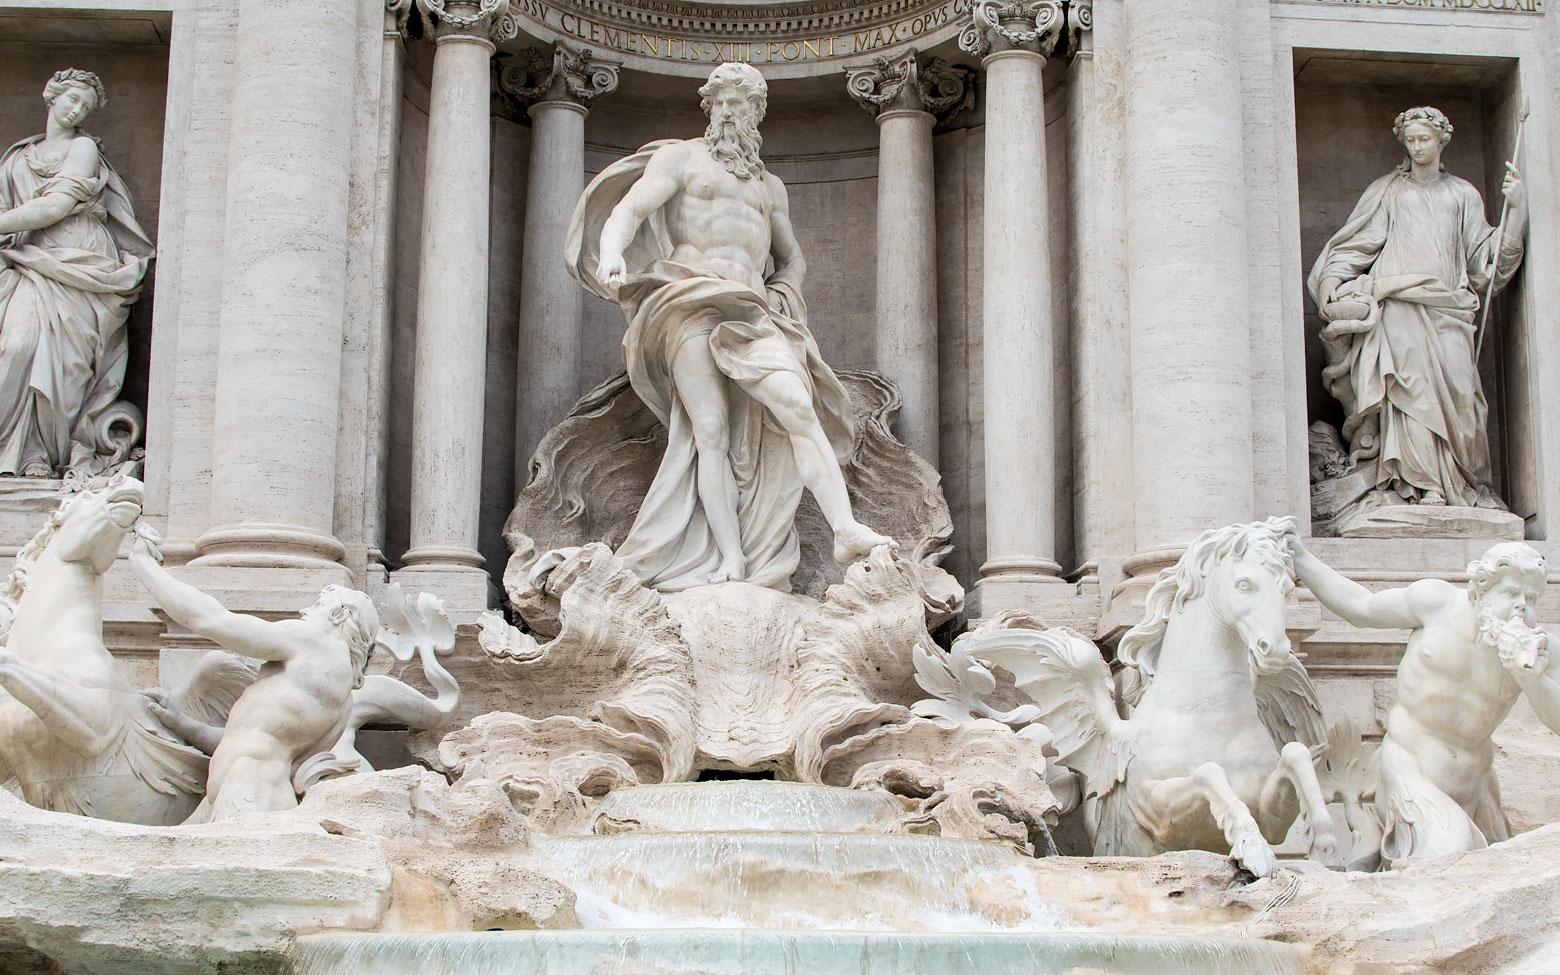 3 days in Rome itinerary day 1 - The Trevi Fountain